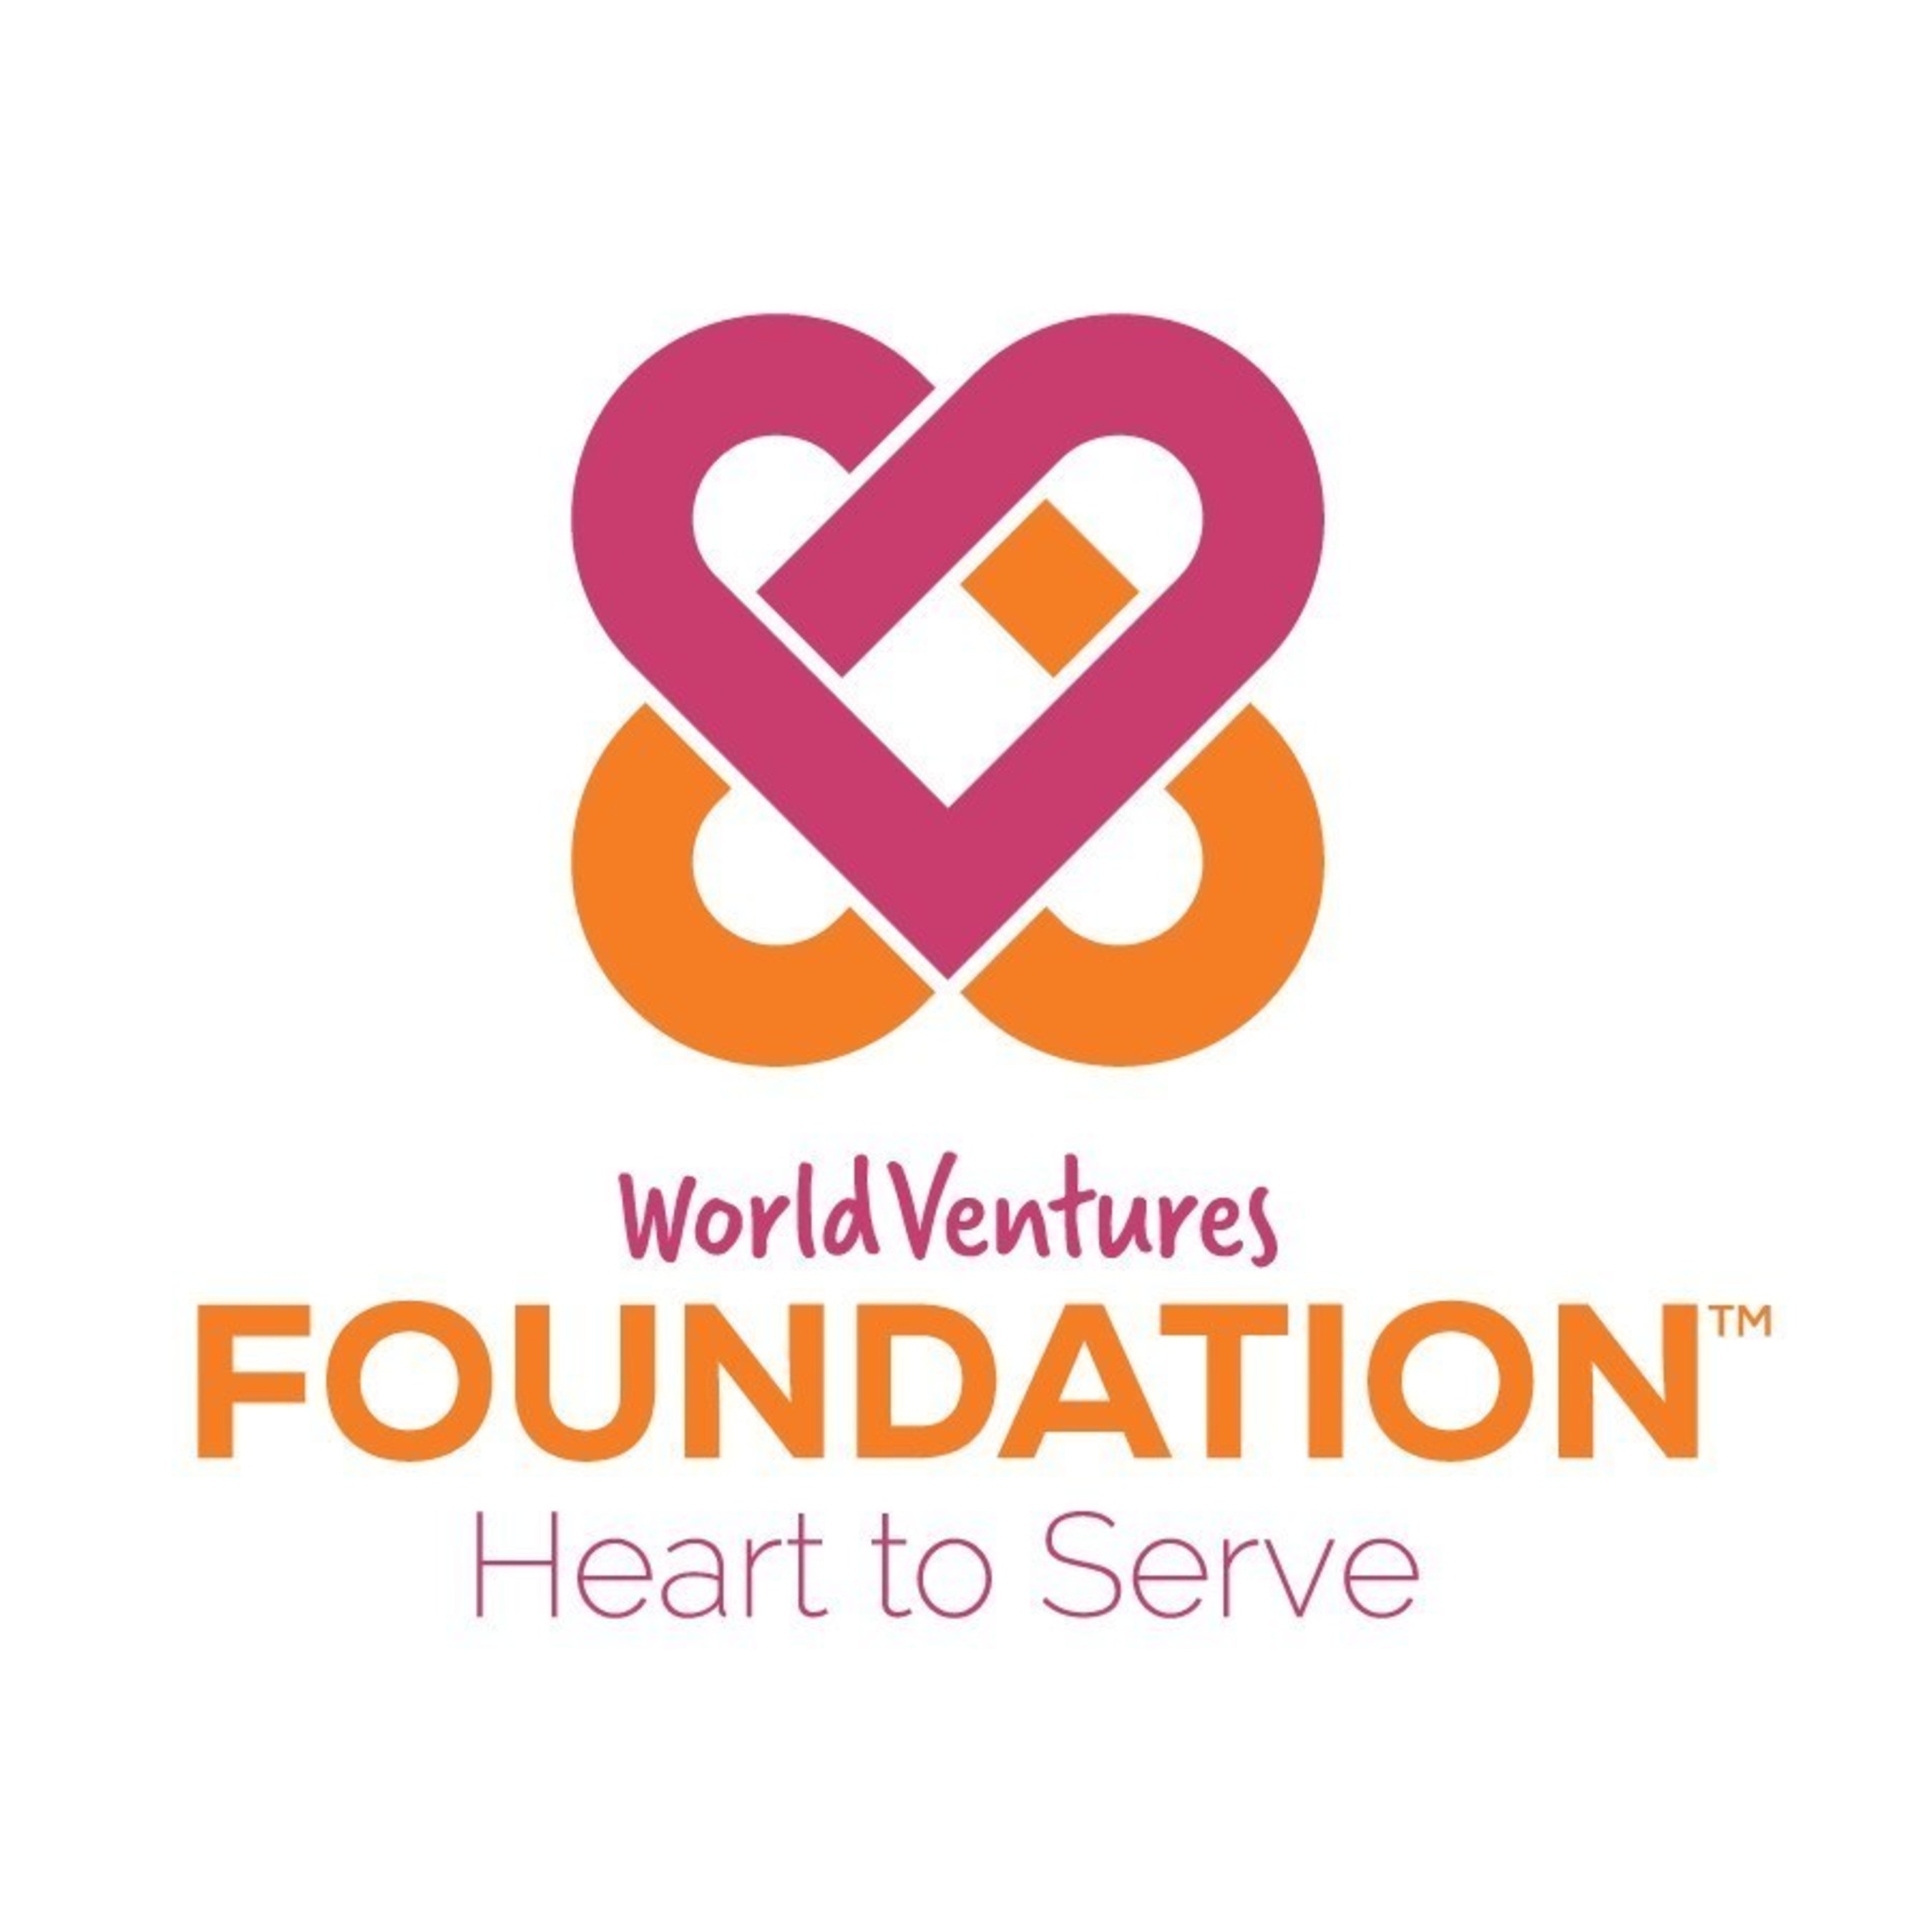 New WorldVentures Foundation branding invites Independent Representatives, DreamTrips Members and employees to have the Heart to Serve.